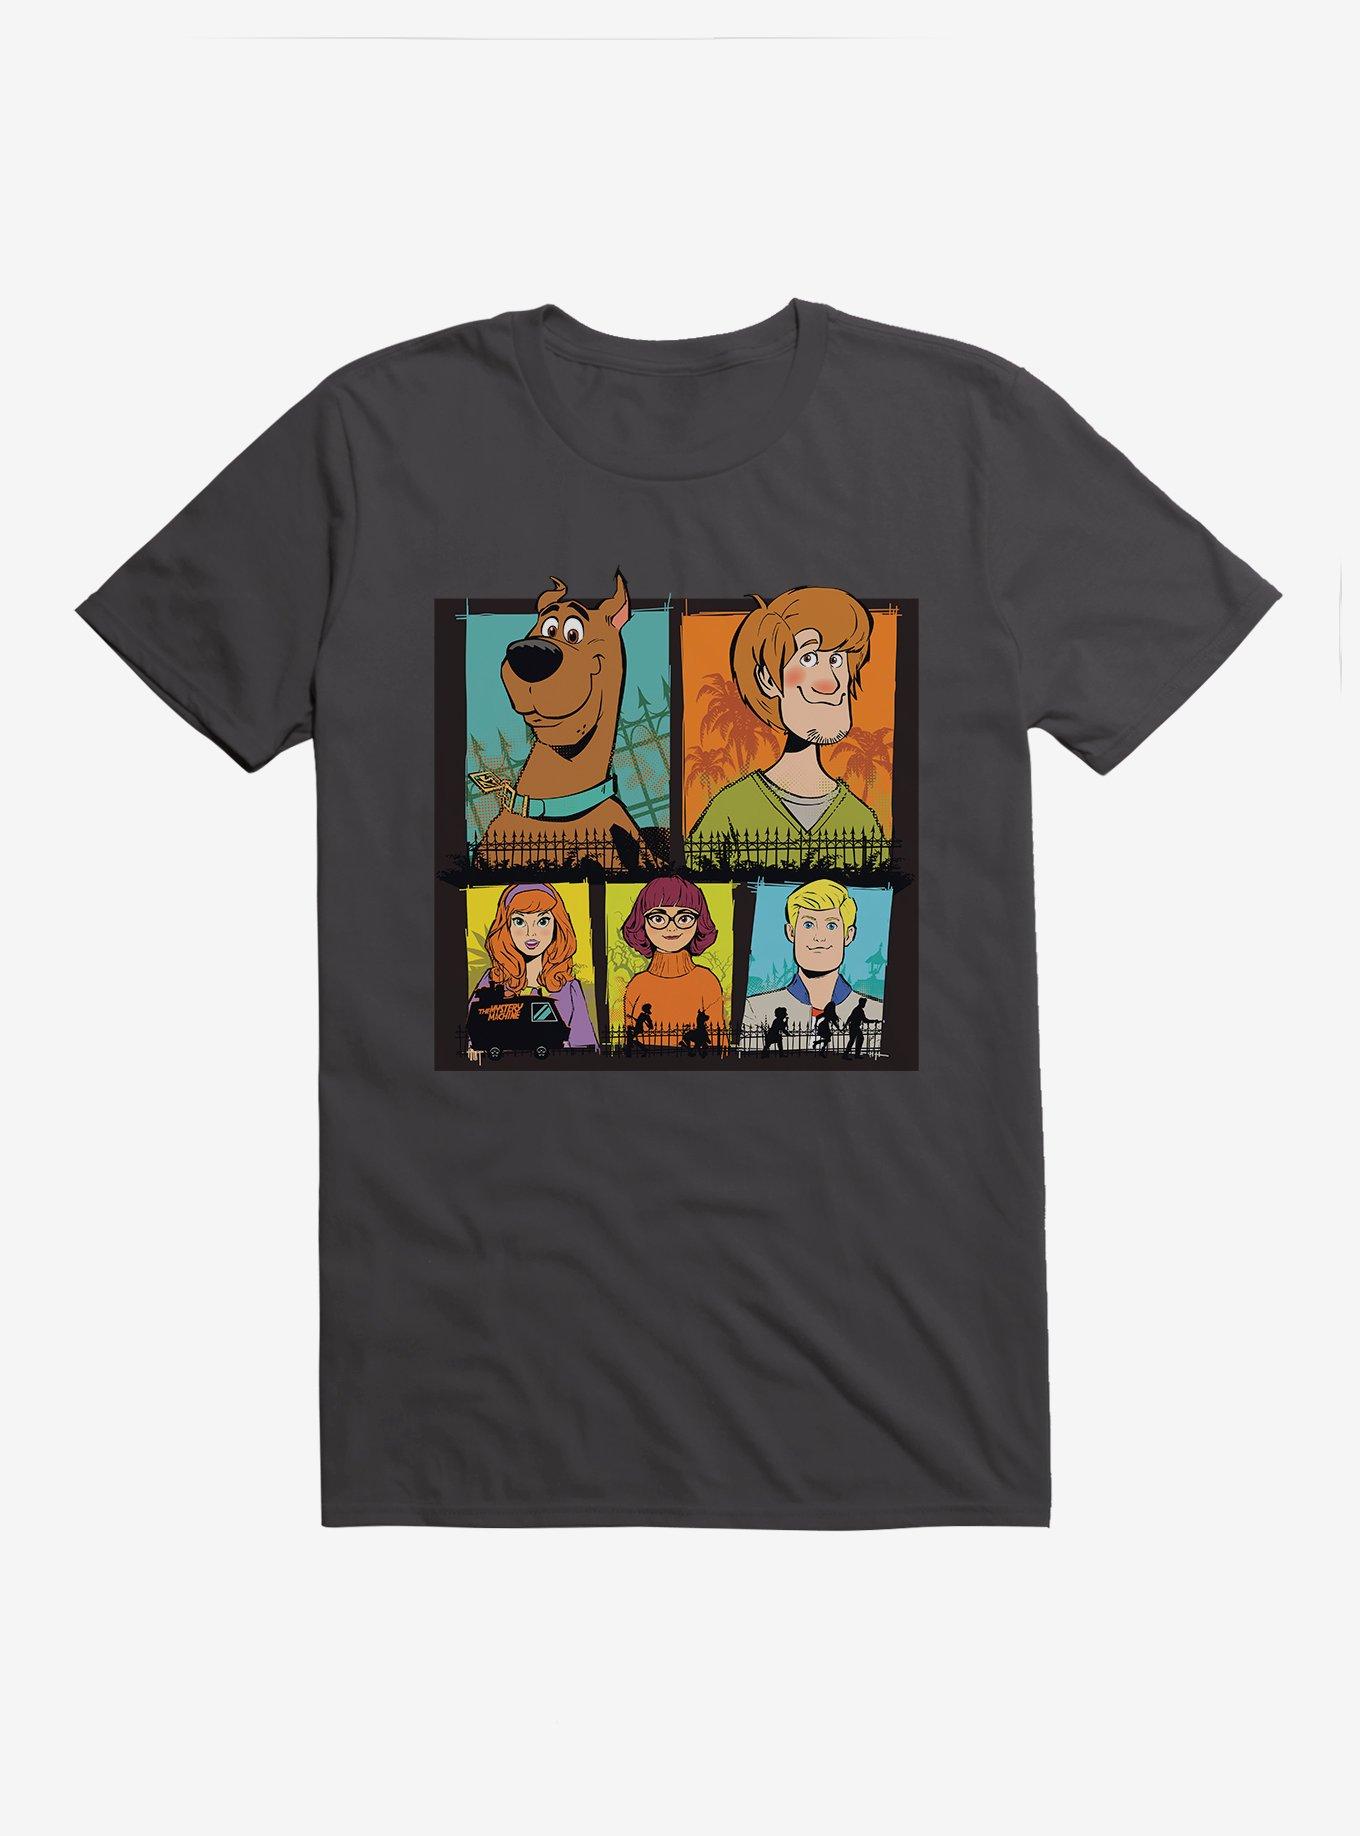 Scooby Doo and Shaggy Mystery Inc Men's Black Graphic Tee - S